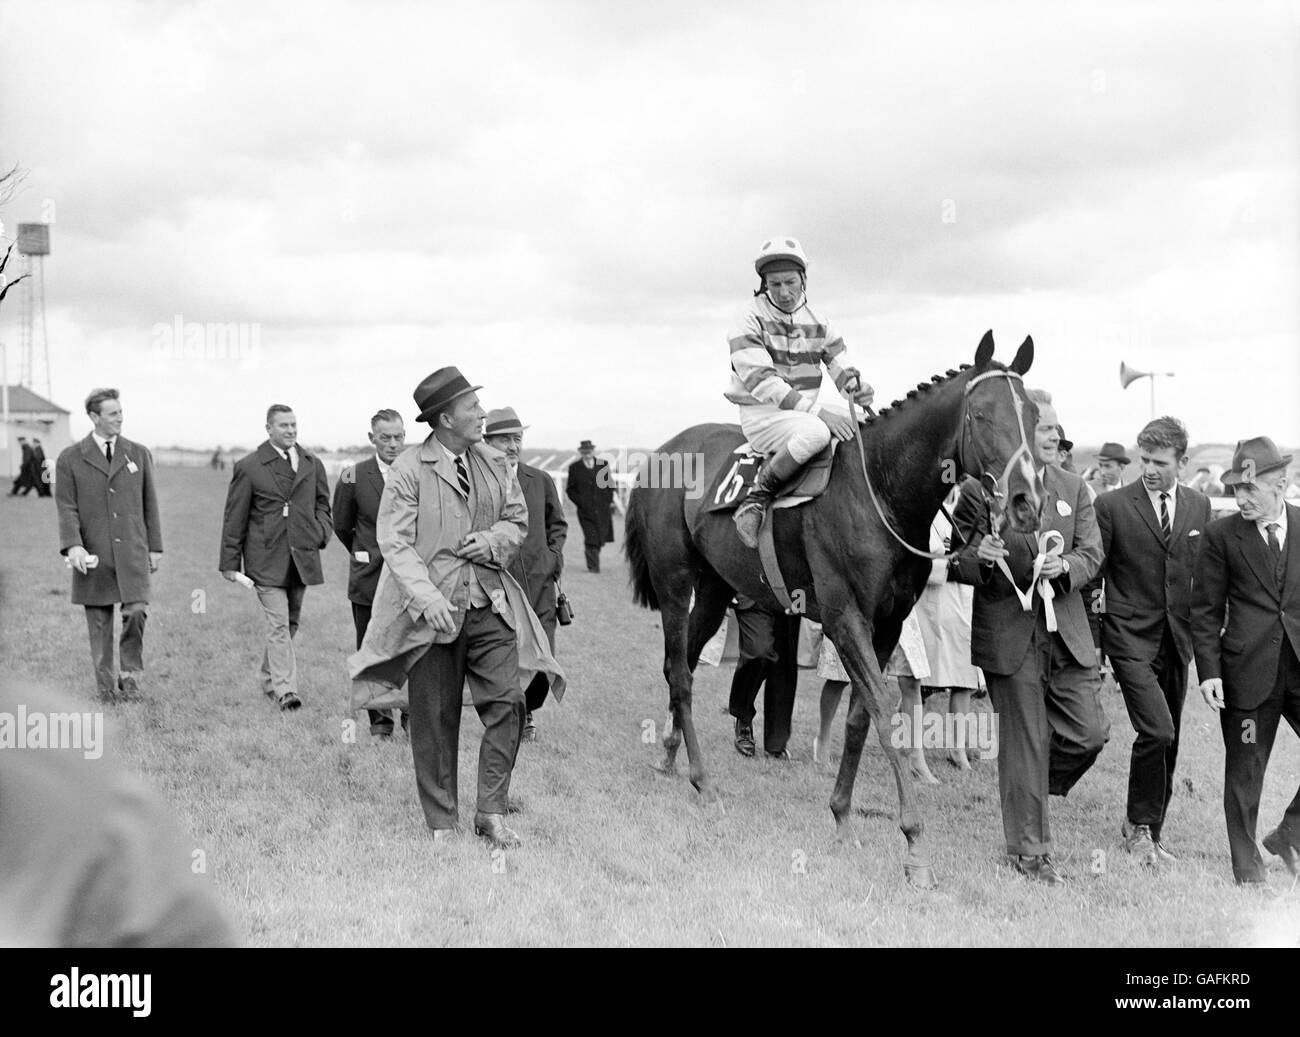 Horse Racing - The Irish Derby - The Curragh. Irish Derby winner Meadow Court, Lester Piggott up, with part owner Bing Crosby (l) walking alongside Stock Photo